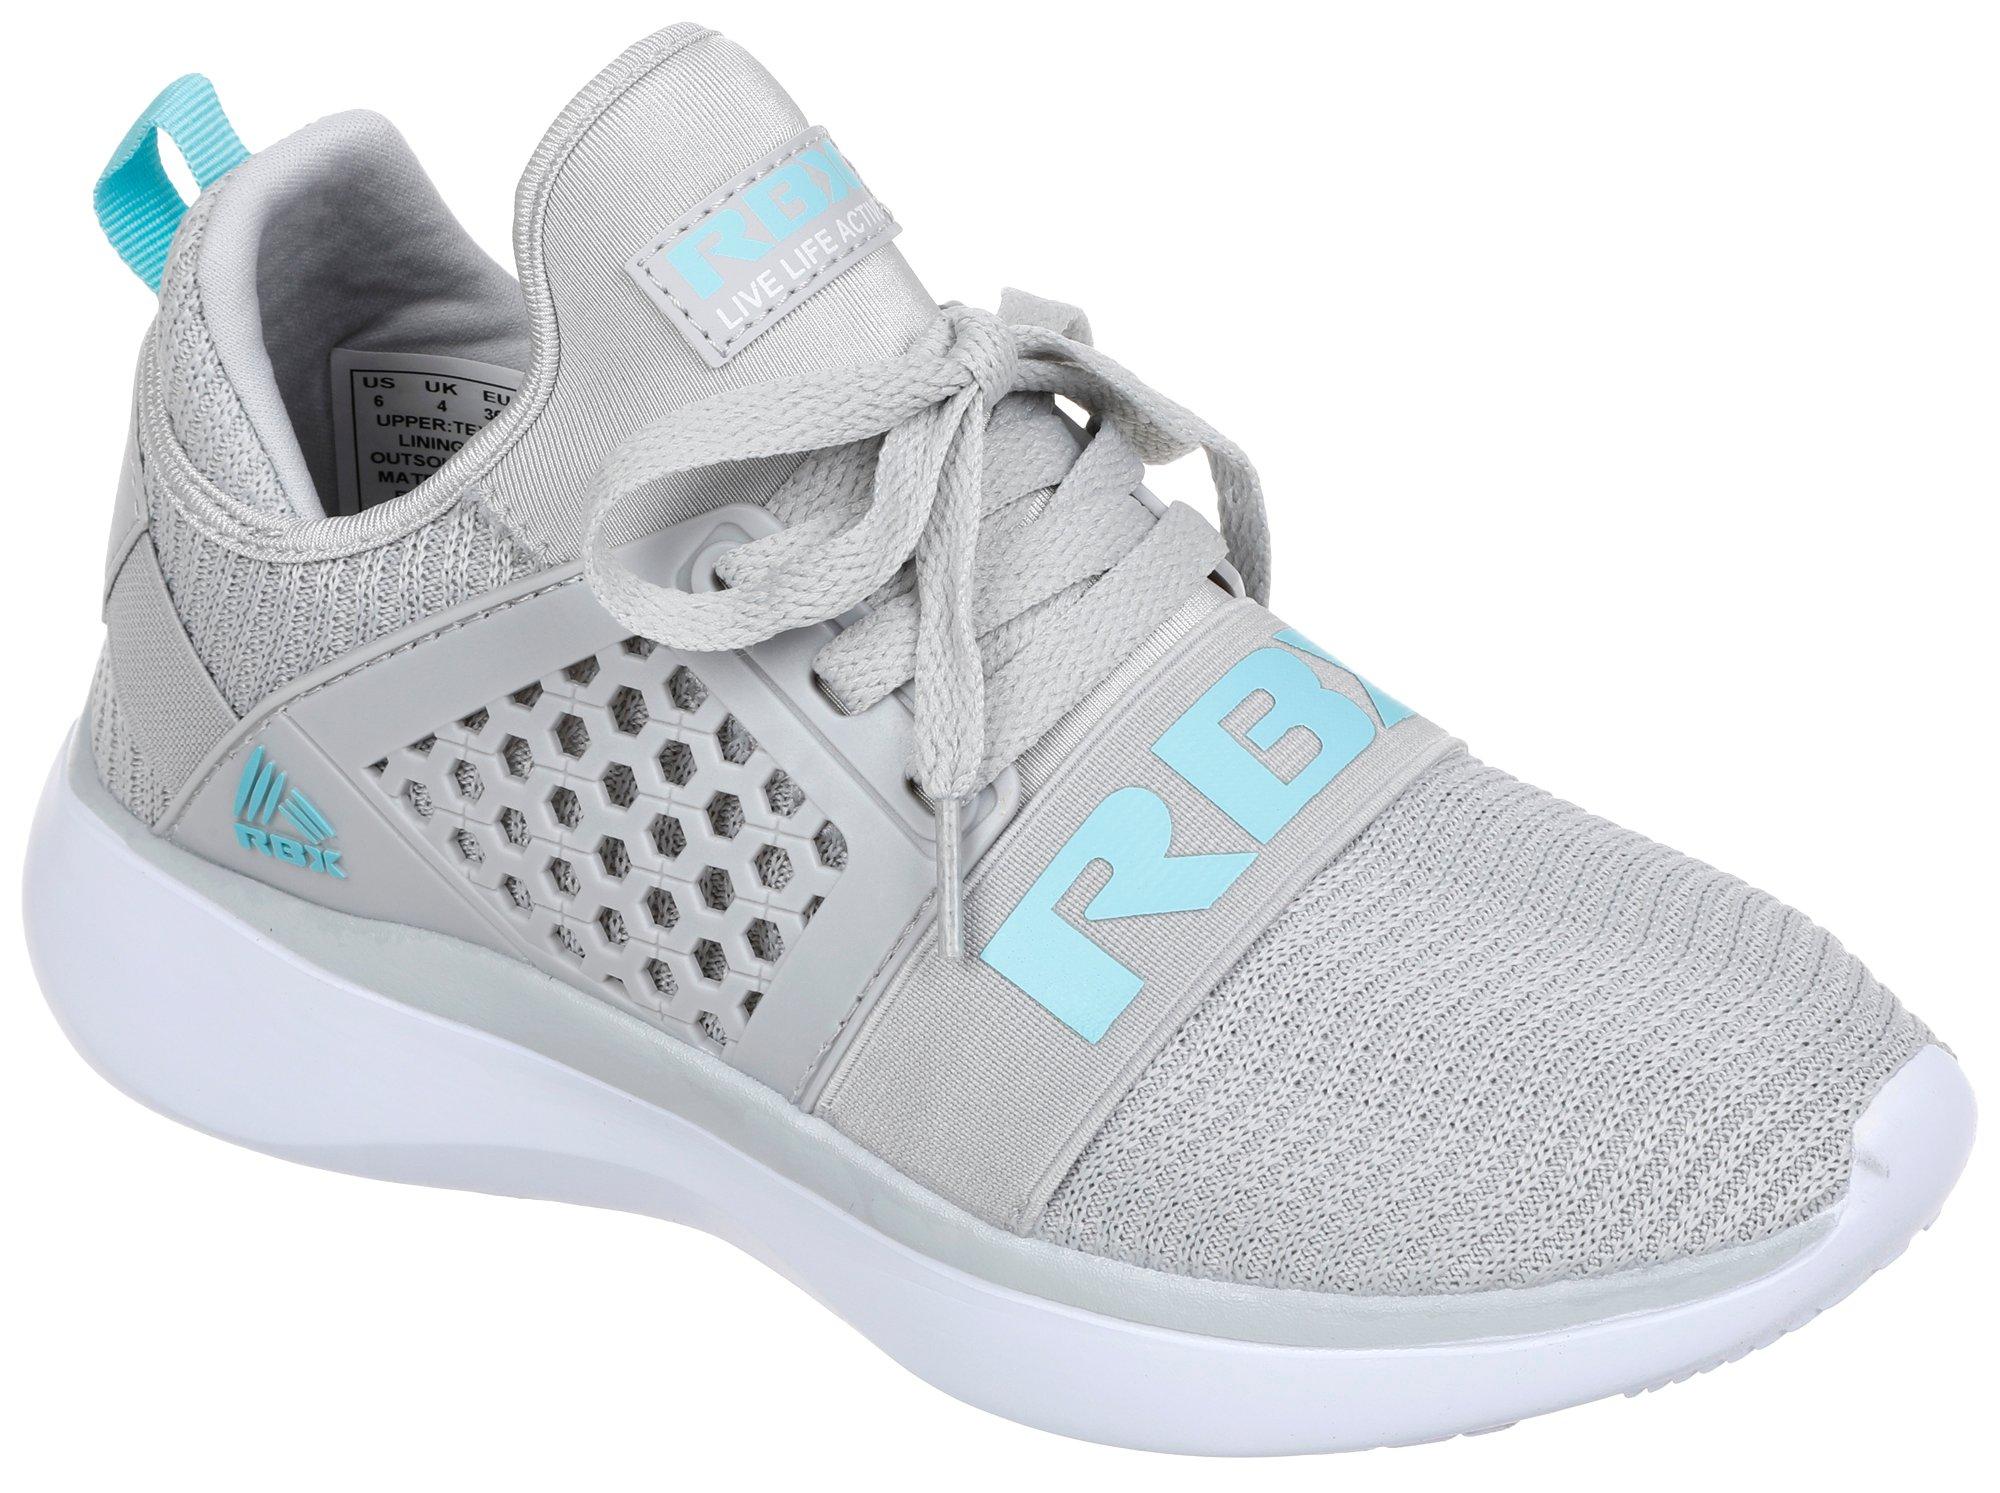 Women's Band Logo Knit Athletic Sneakers - Grey